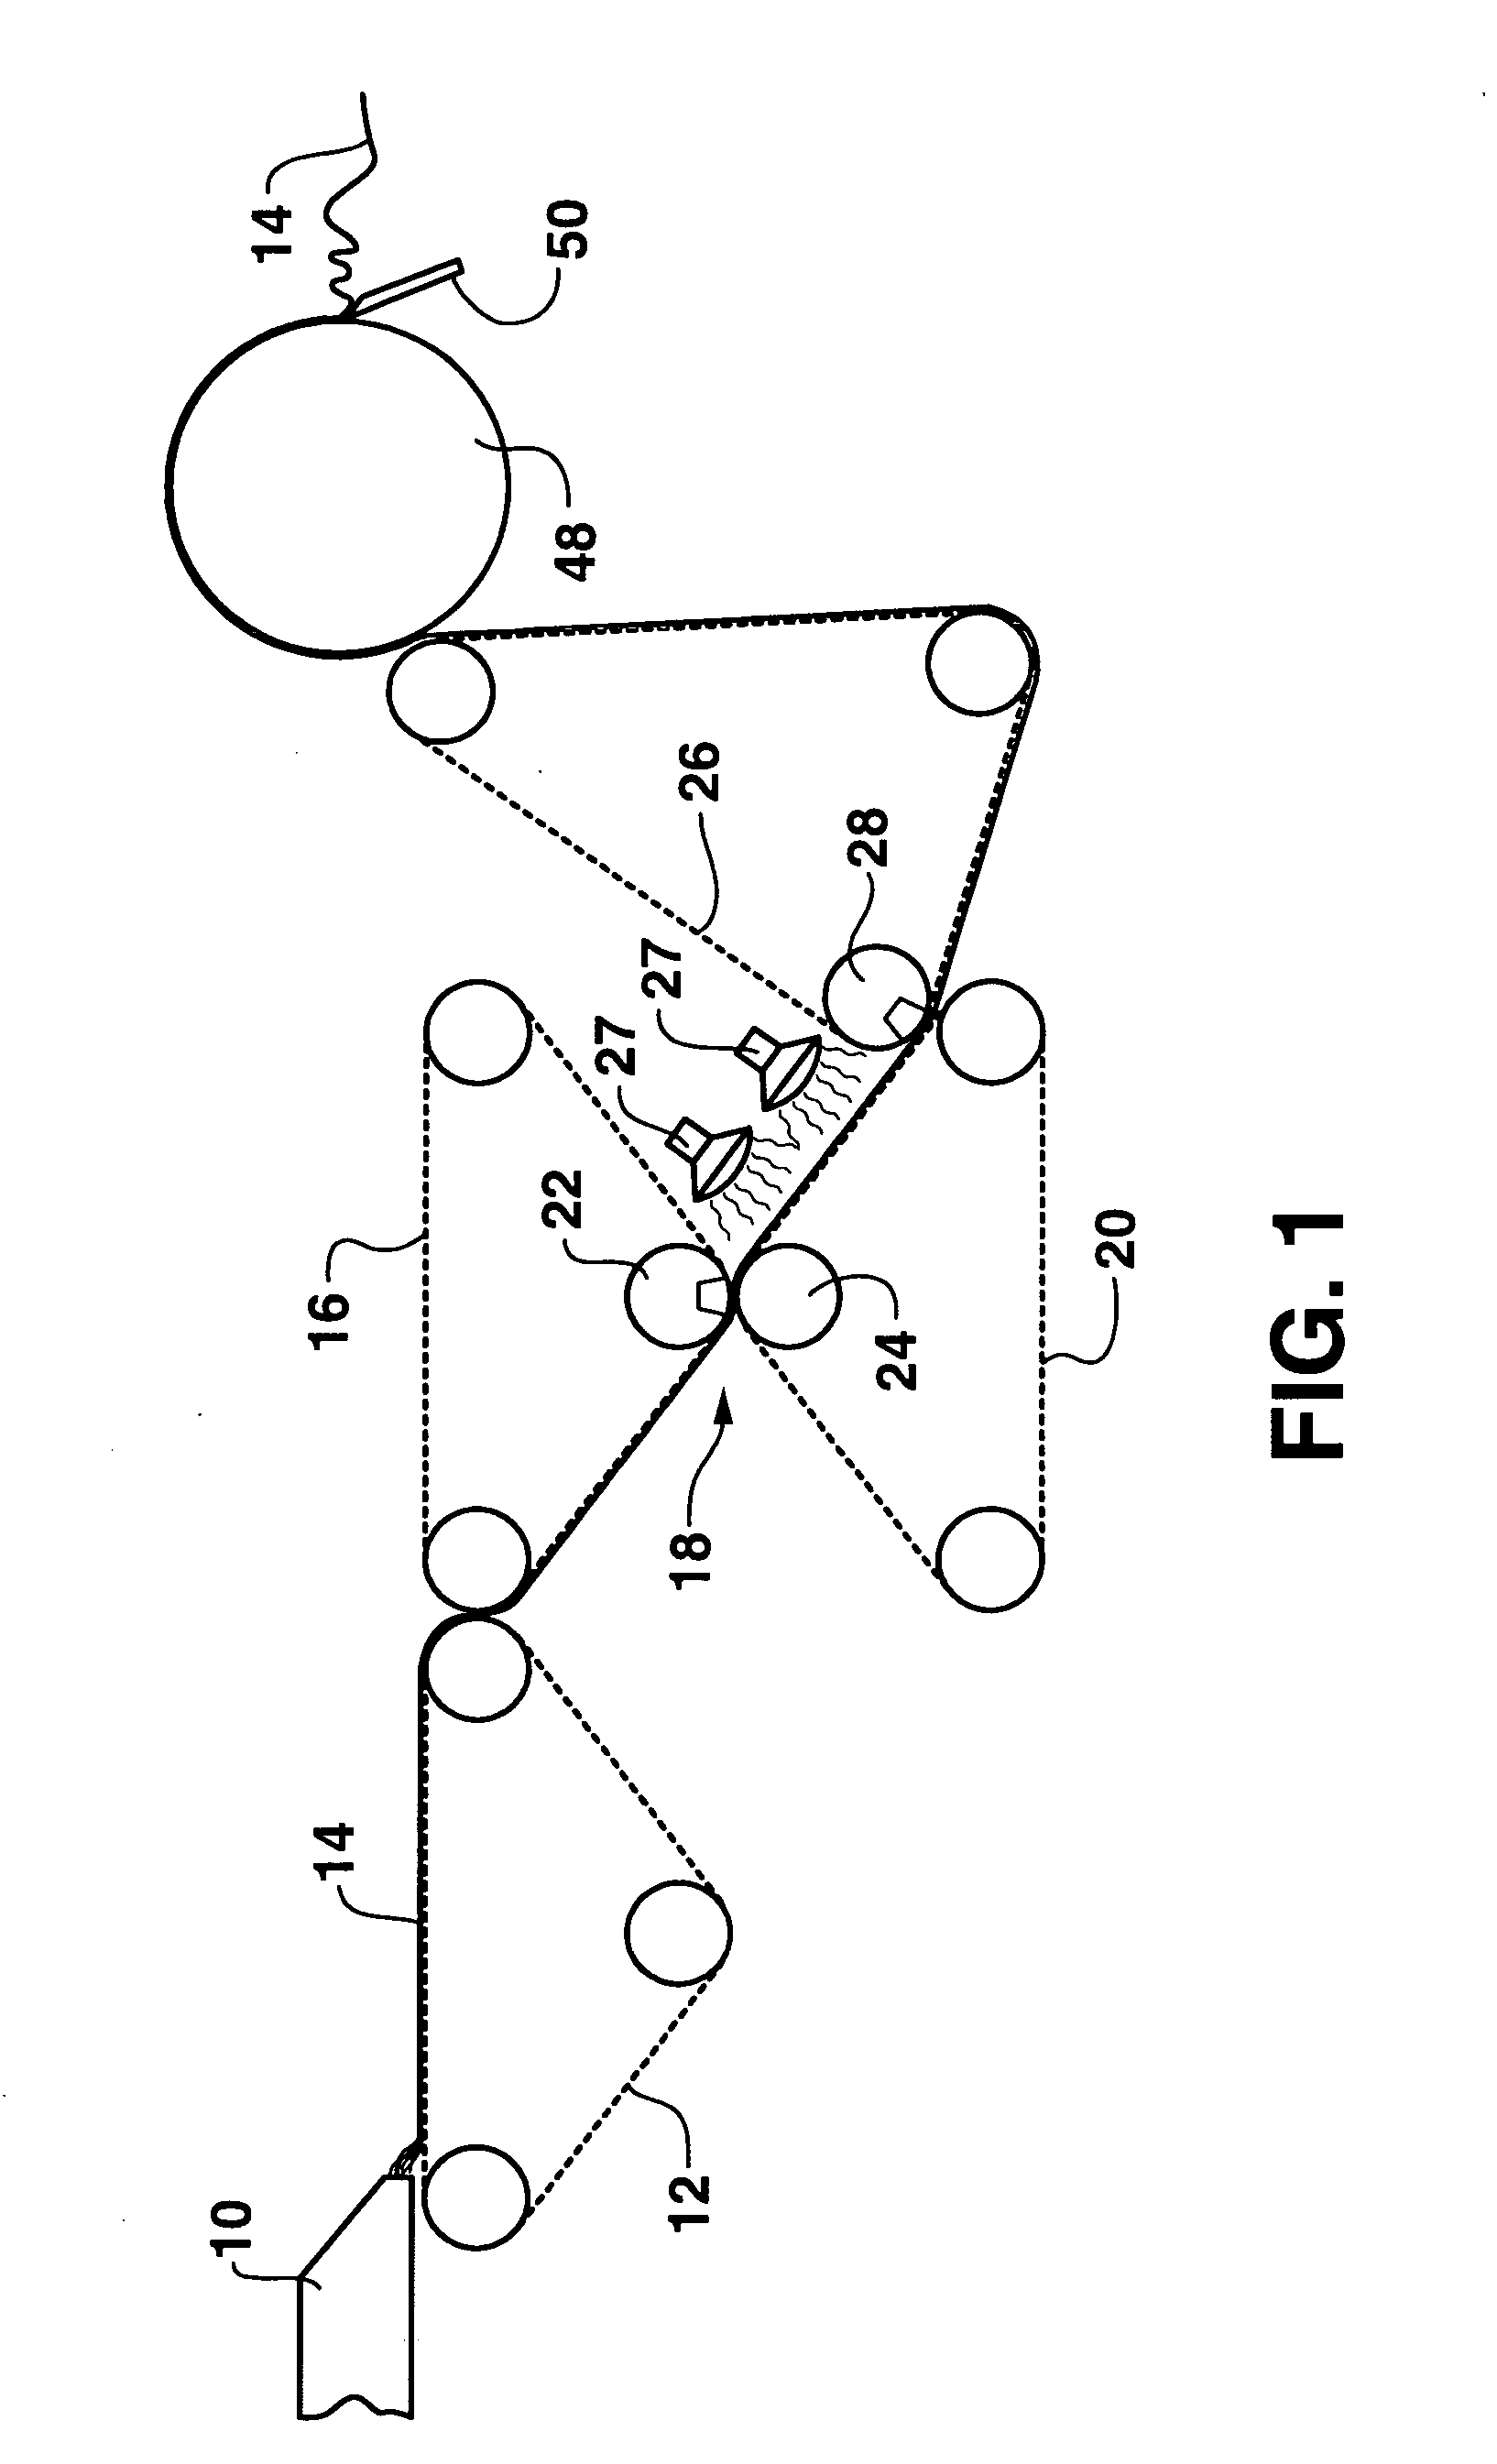 Method of transferring a wet tissue web to a three-dimensional fabric